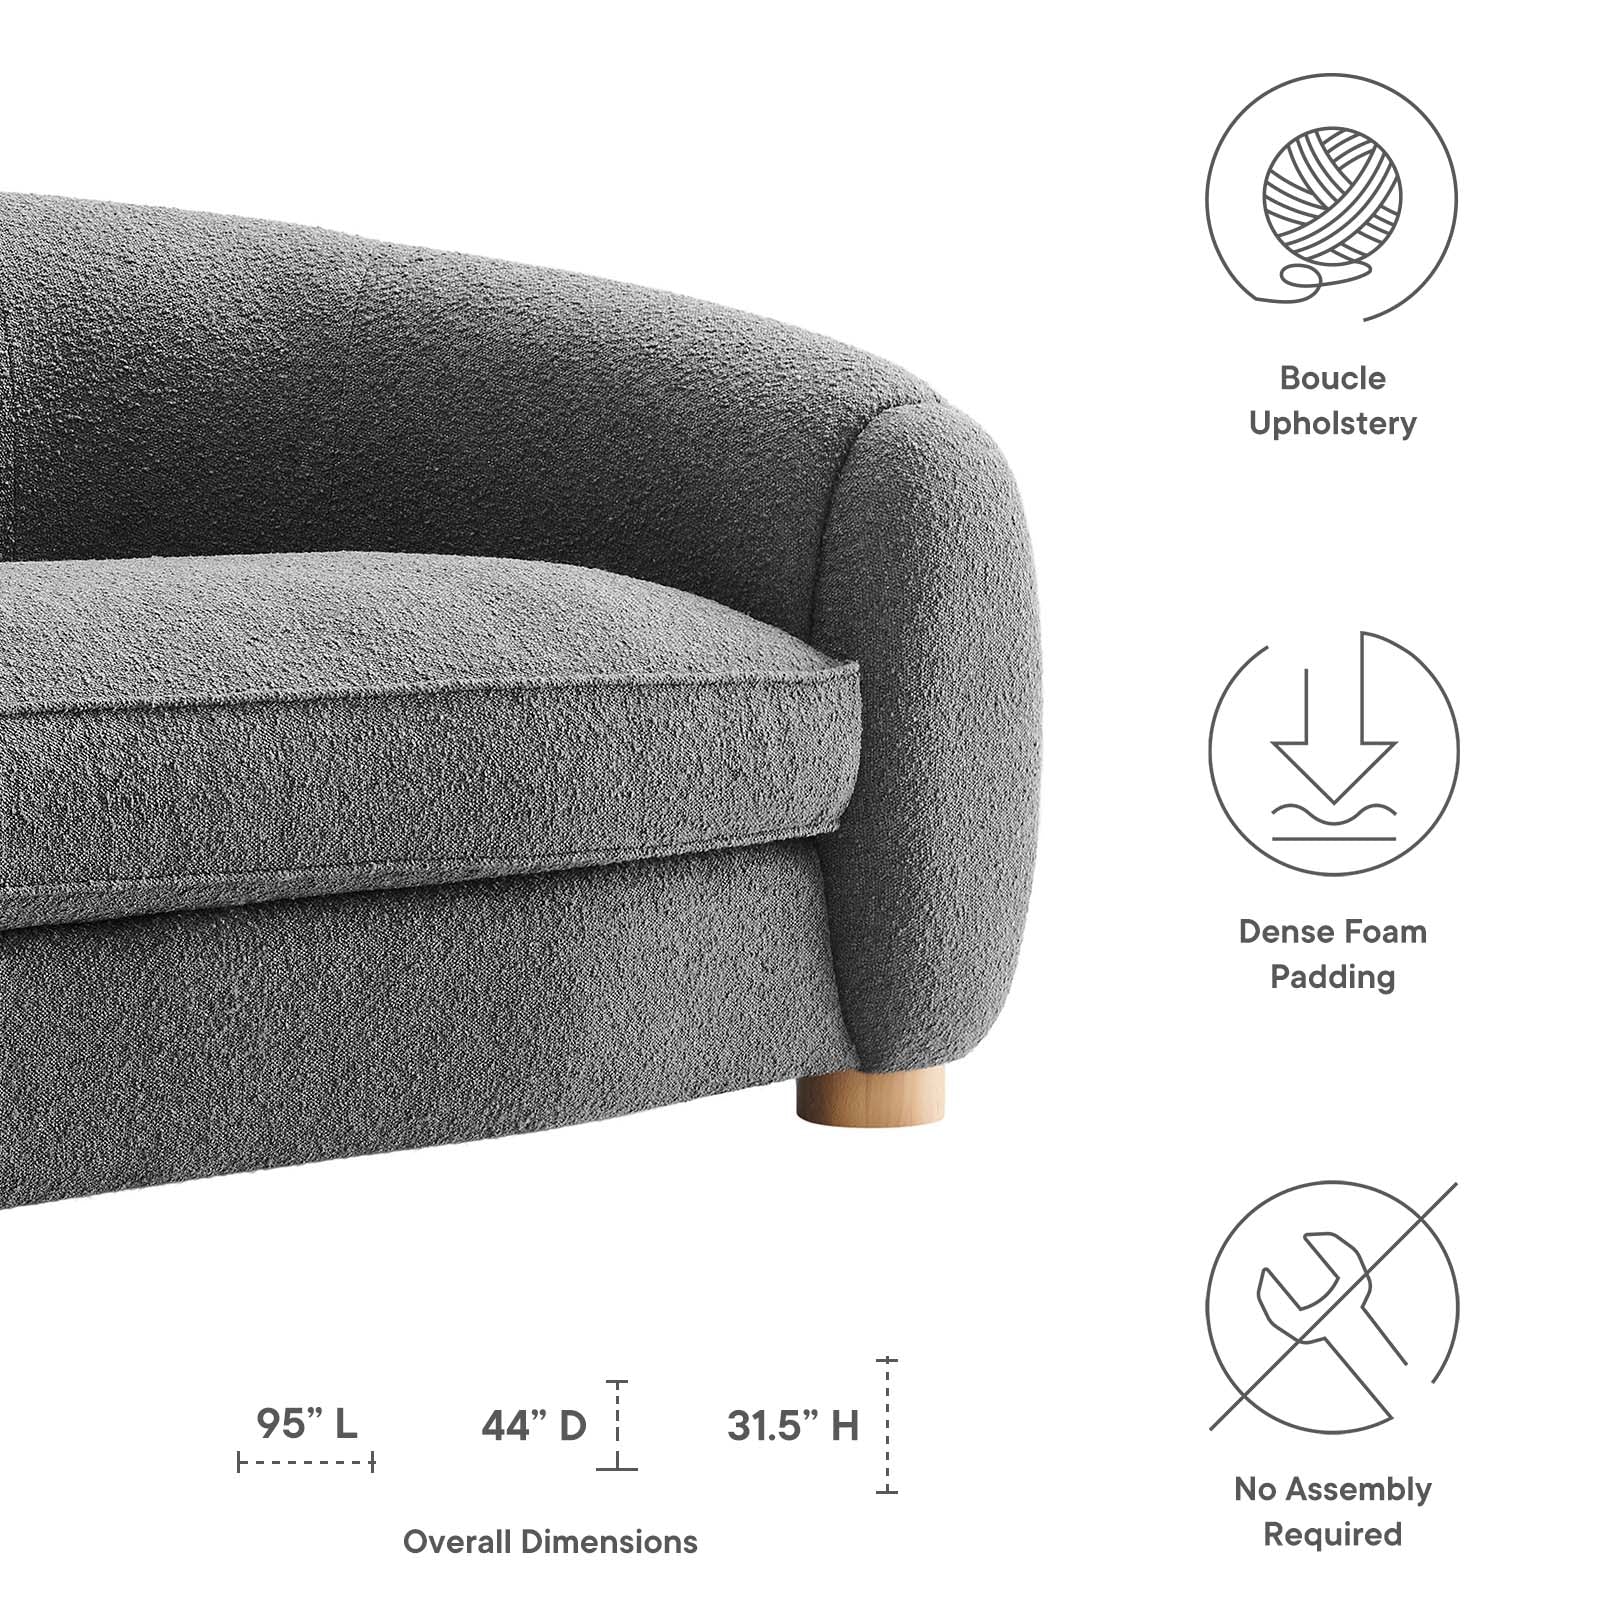 French Boucle Floor Cushion, Floor Sofa: Seat With Backrest, Bench